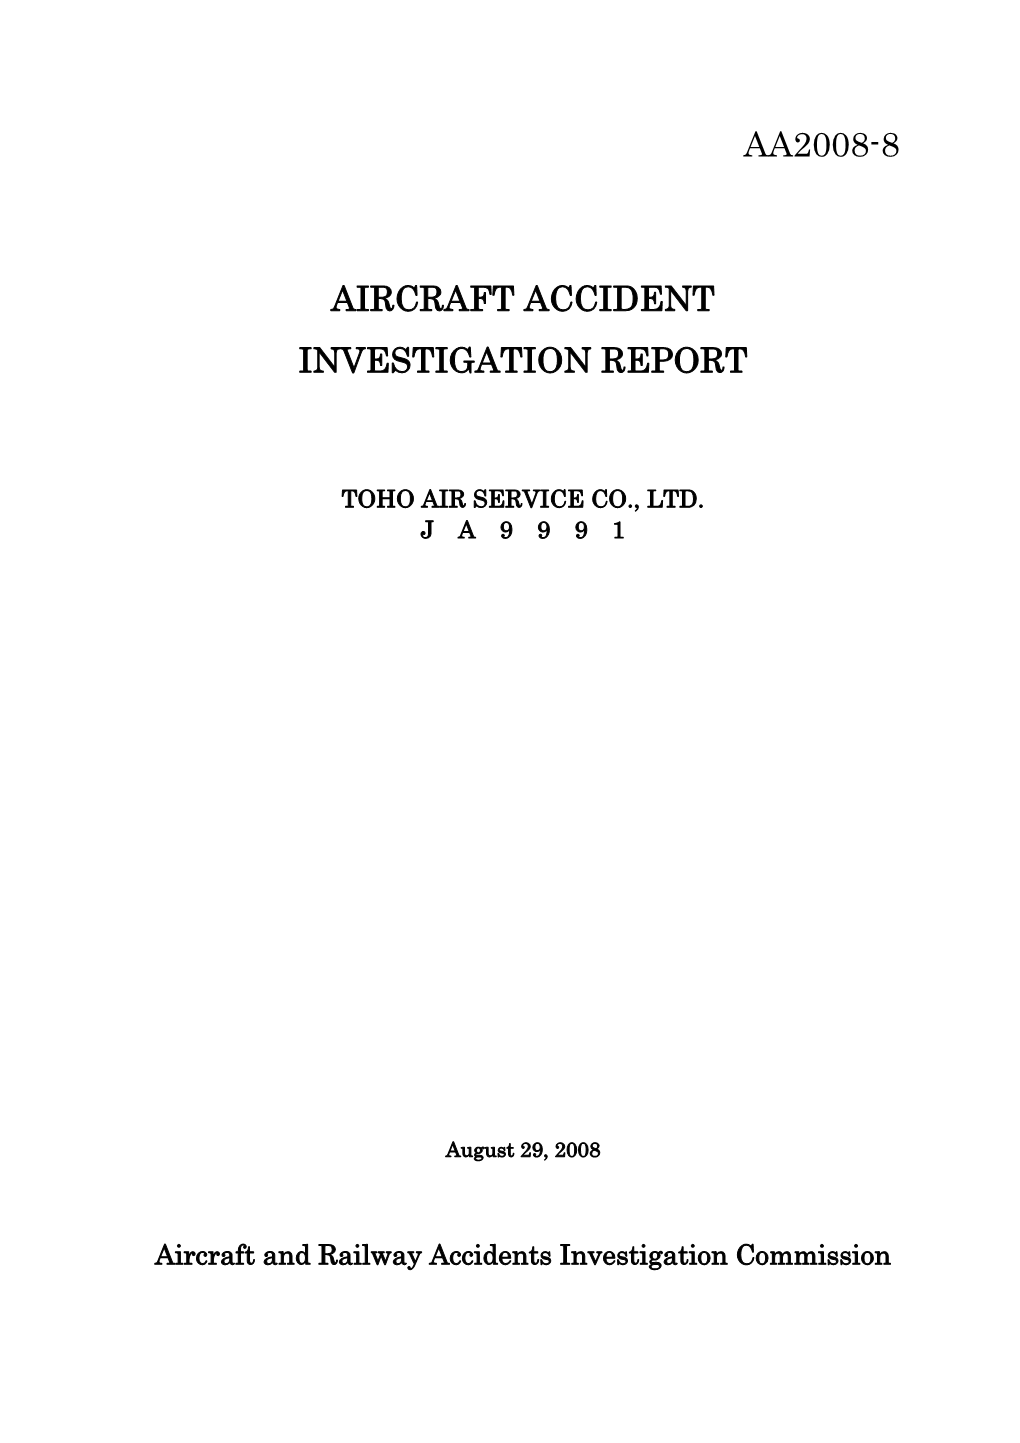 Aa2008-8 Aircraft Accident Investigation Report